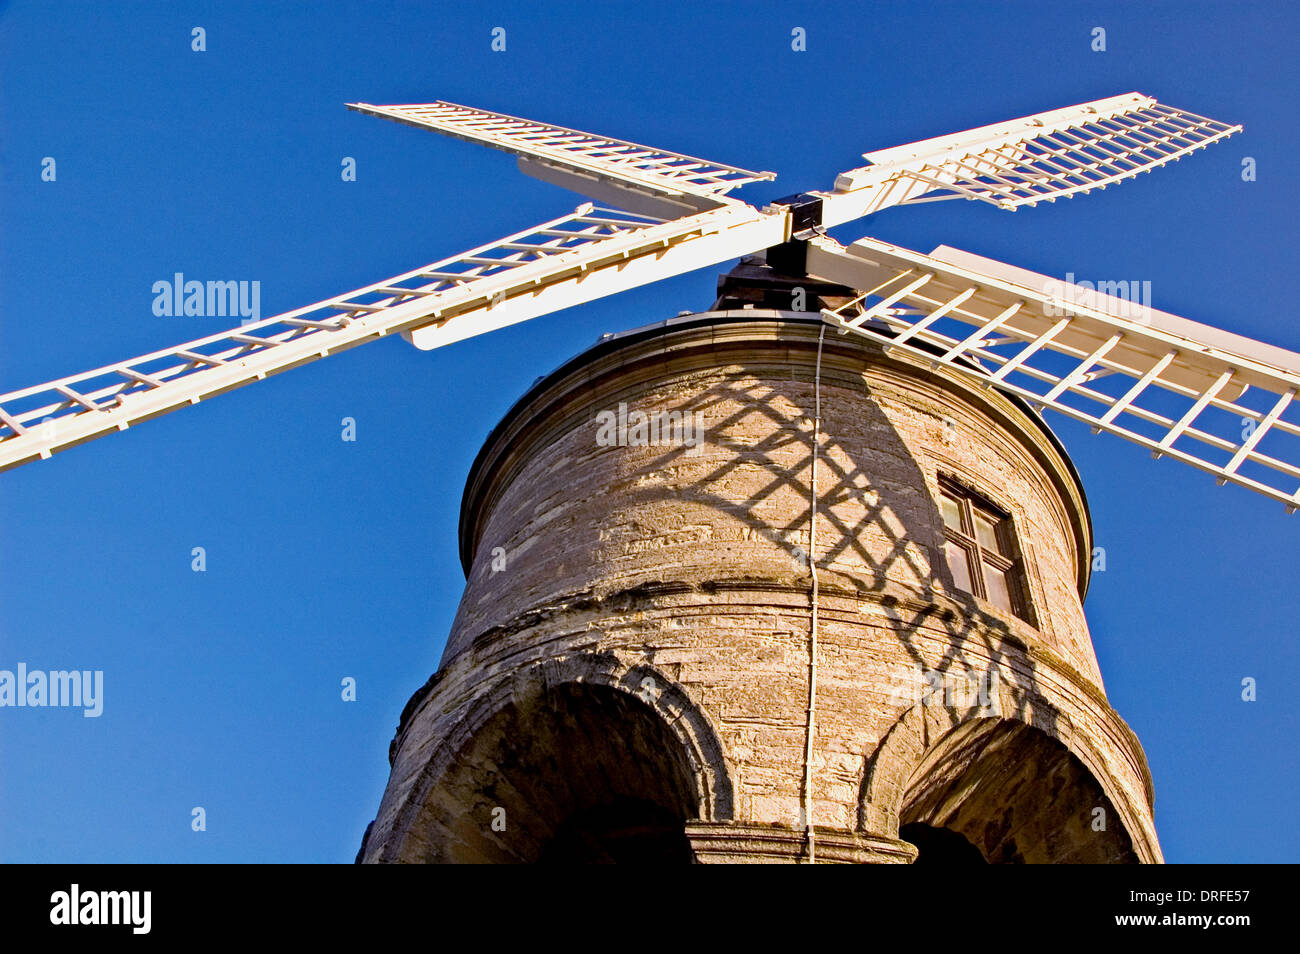 Chesterton Windmill in central Warwickshire, with unique stone arch undercroft and white lattice timber sails with a blue sky. Stock Photo